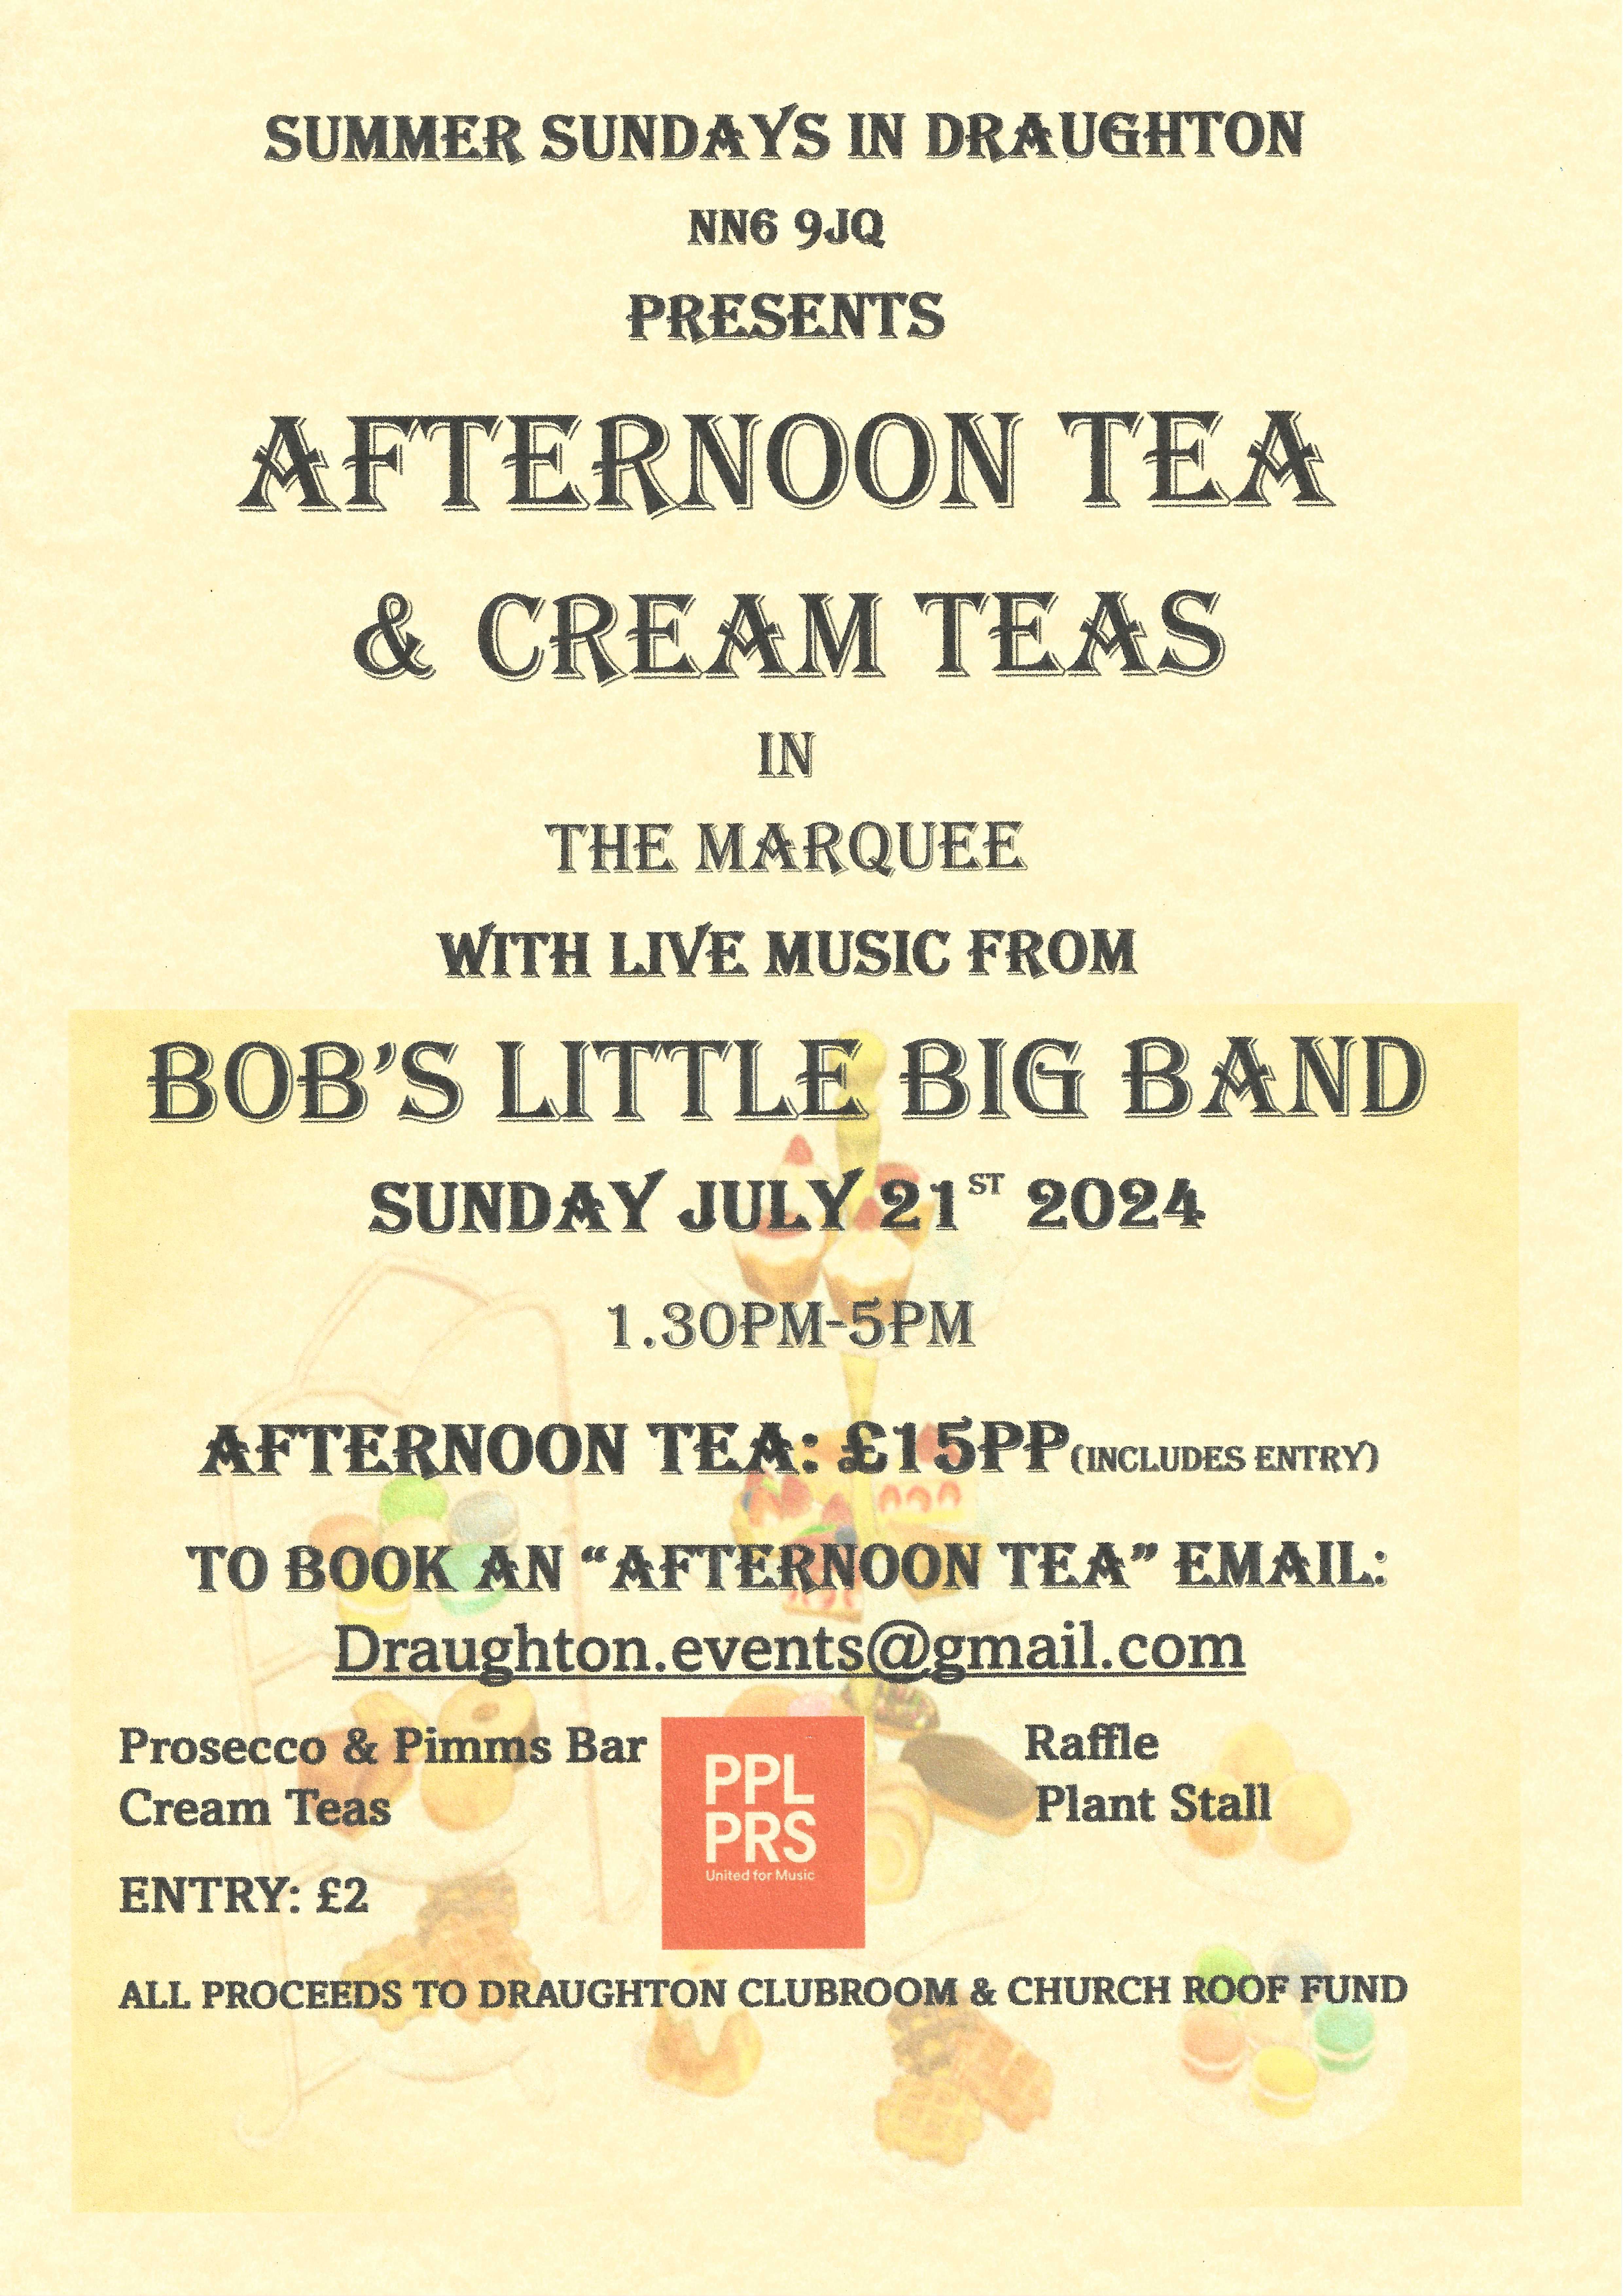 Afternoon Teas and Cream Teas with Live Music in the Marquee